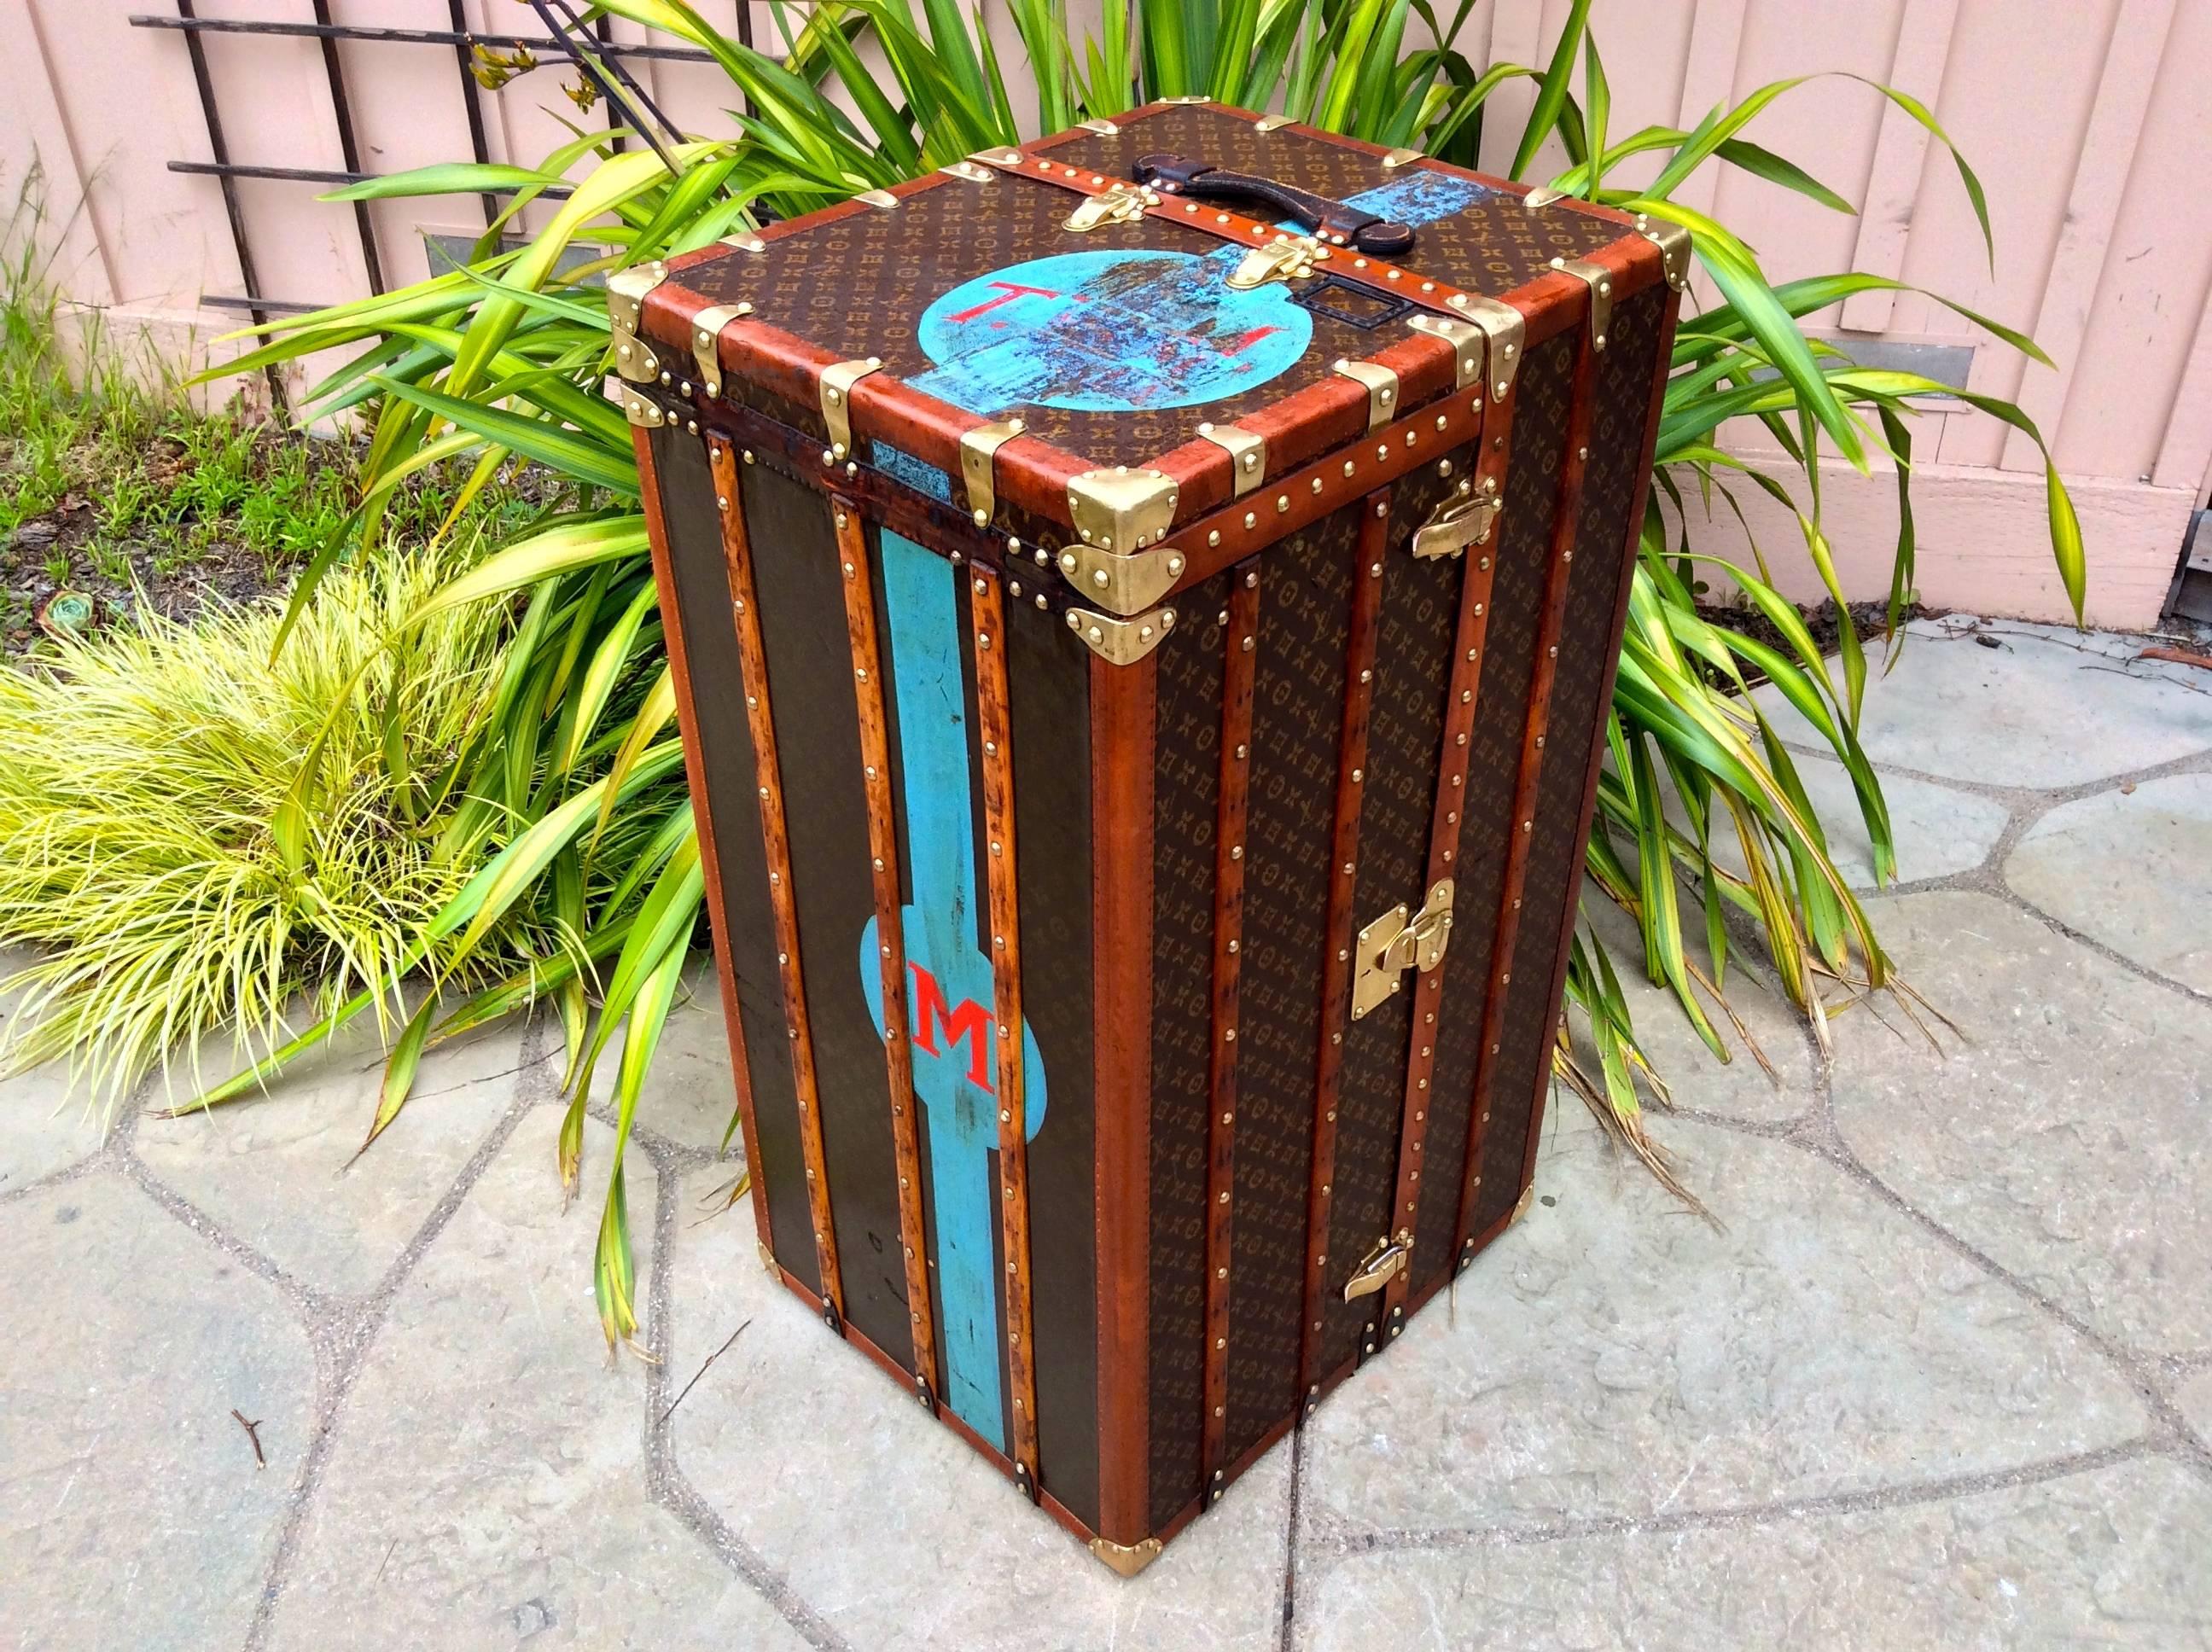 Louis Vuitton Vintage Double Wardrobe Steamer Trunk In Excellent Condition For Sale In Carmel-by-the-sea, CA